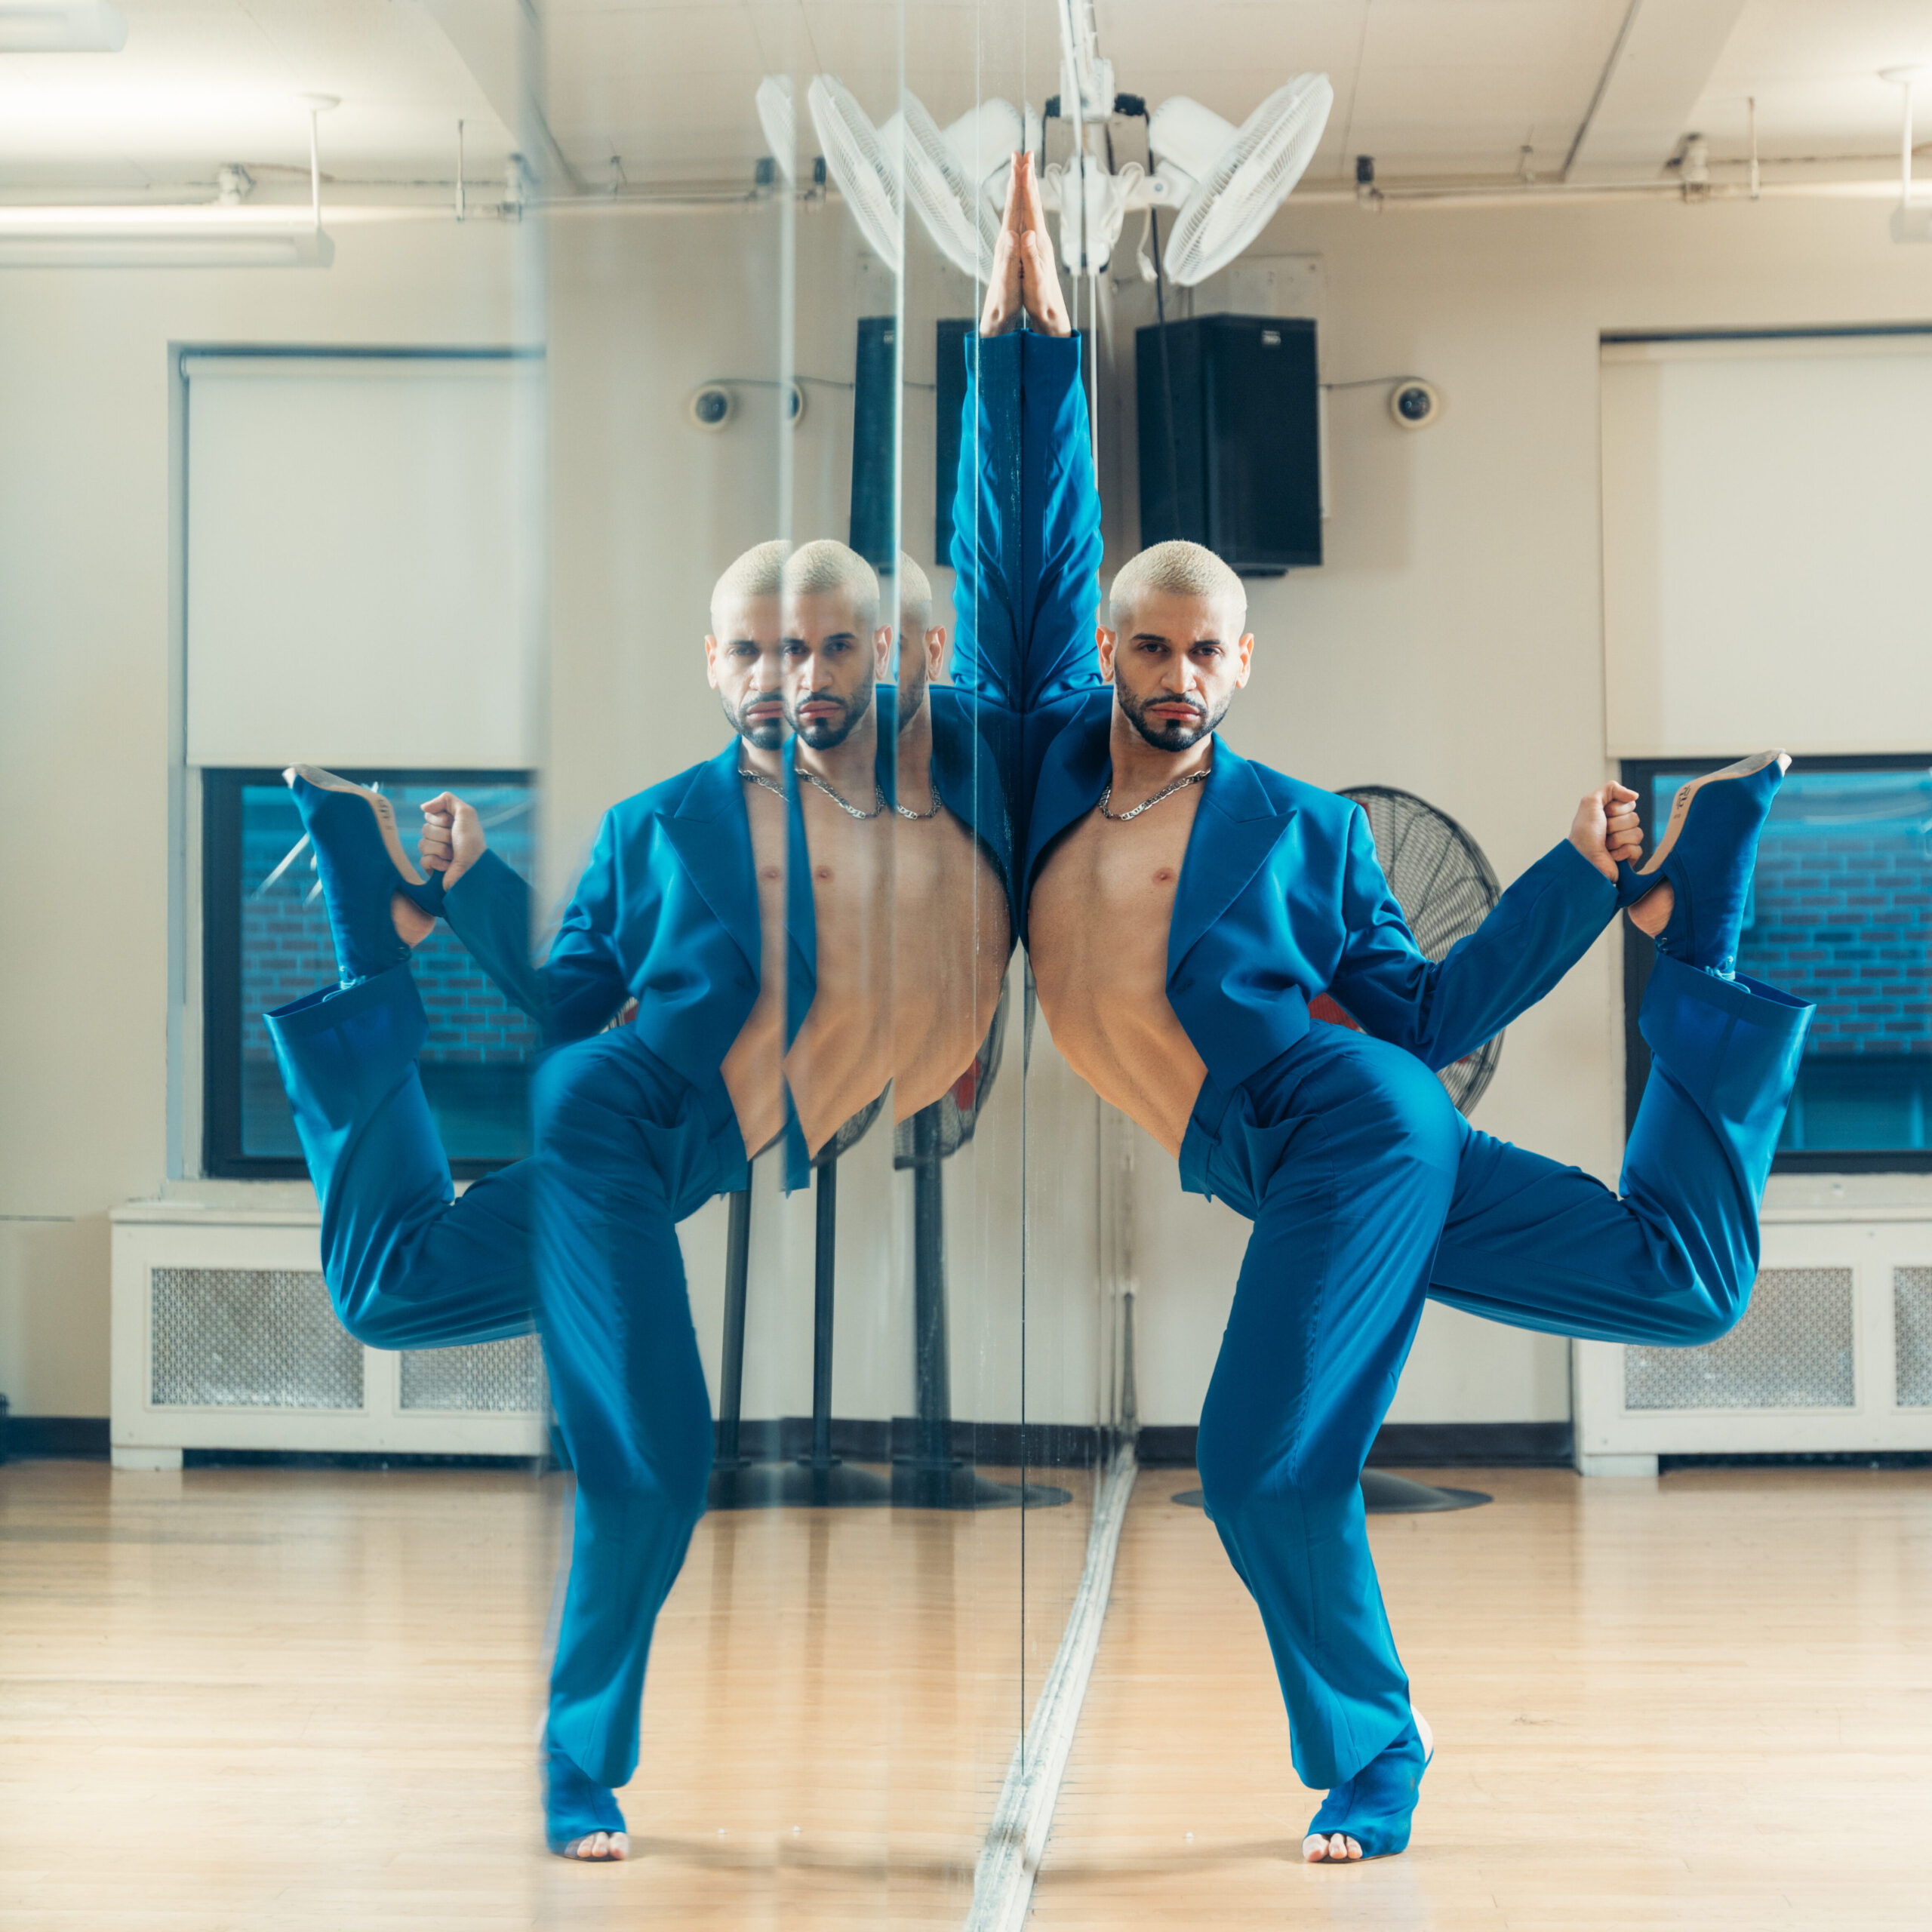 a male dancer wearing a blue suit and heels posing against a mirror in a studio